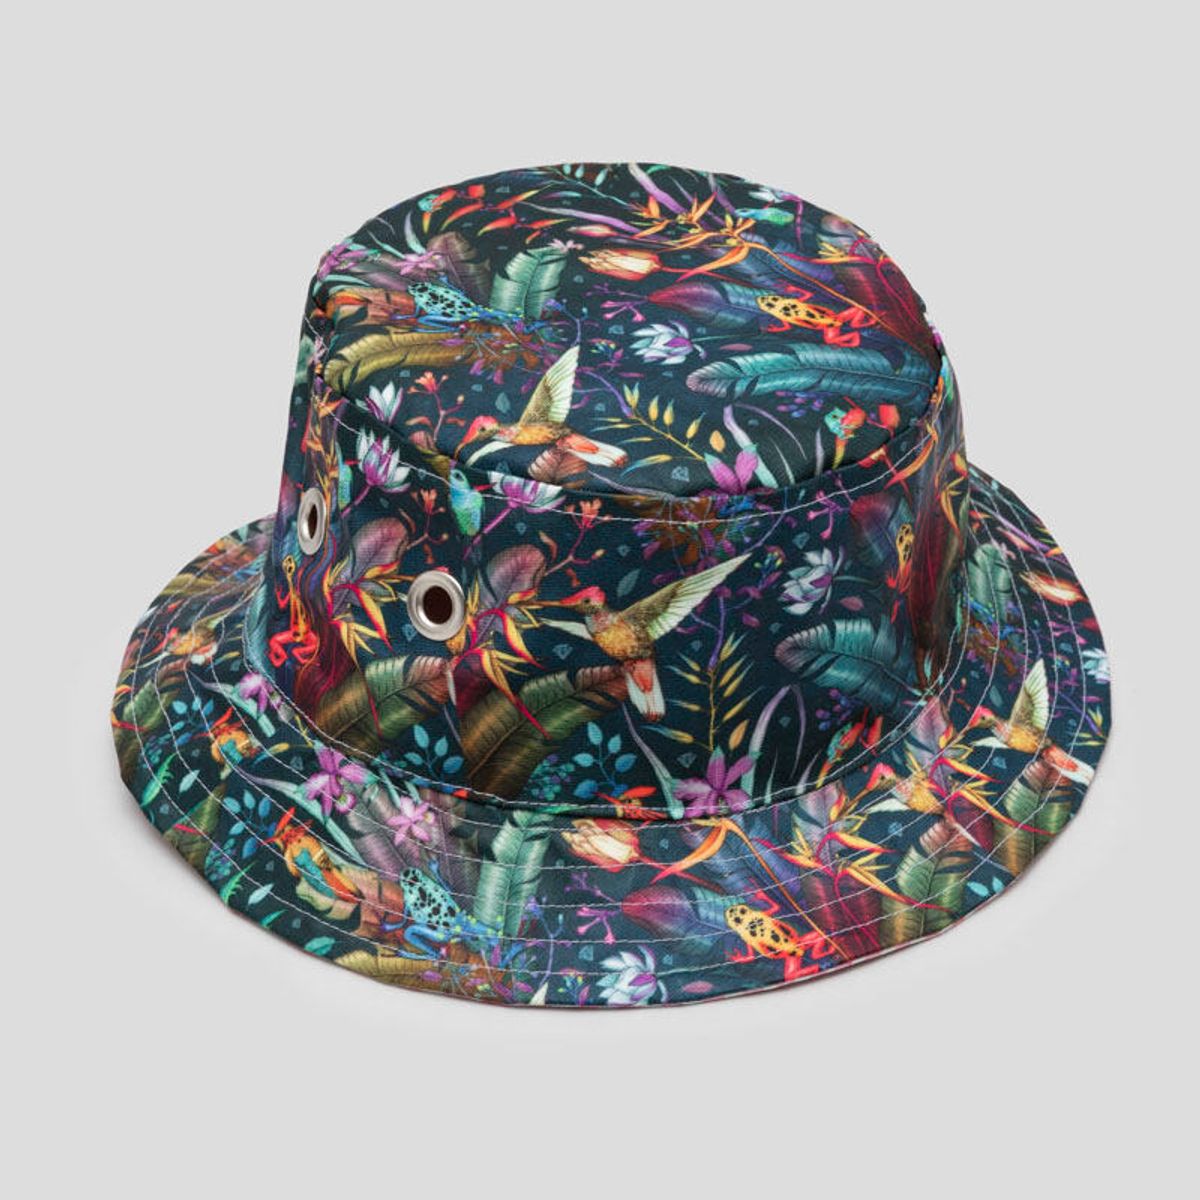 Get A Wholesale floral printing hawaiian bucket hat Order For Less